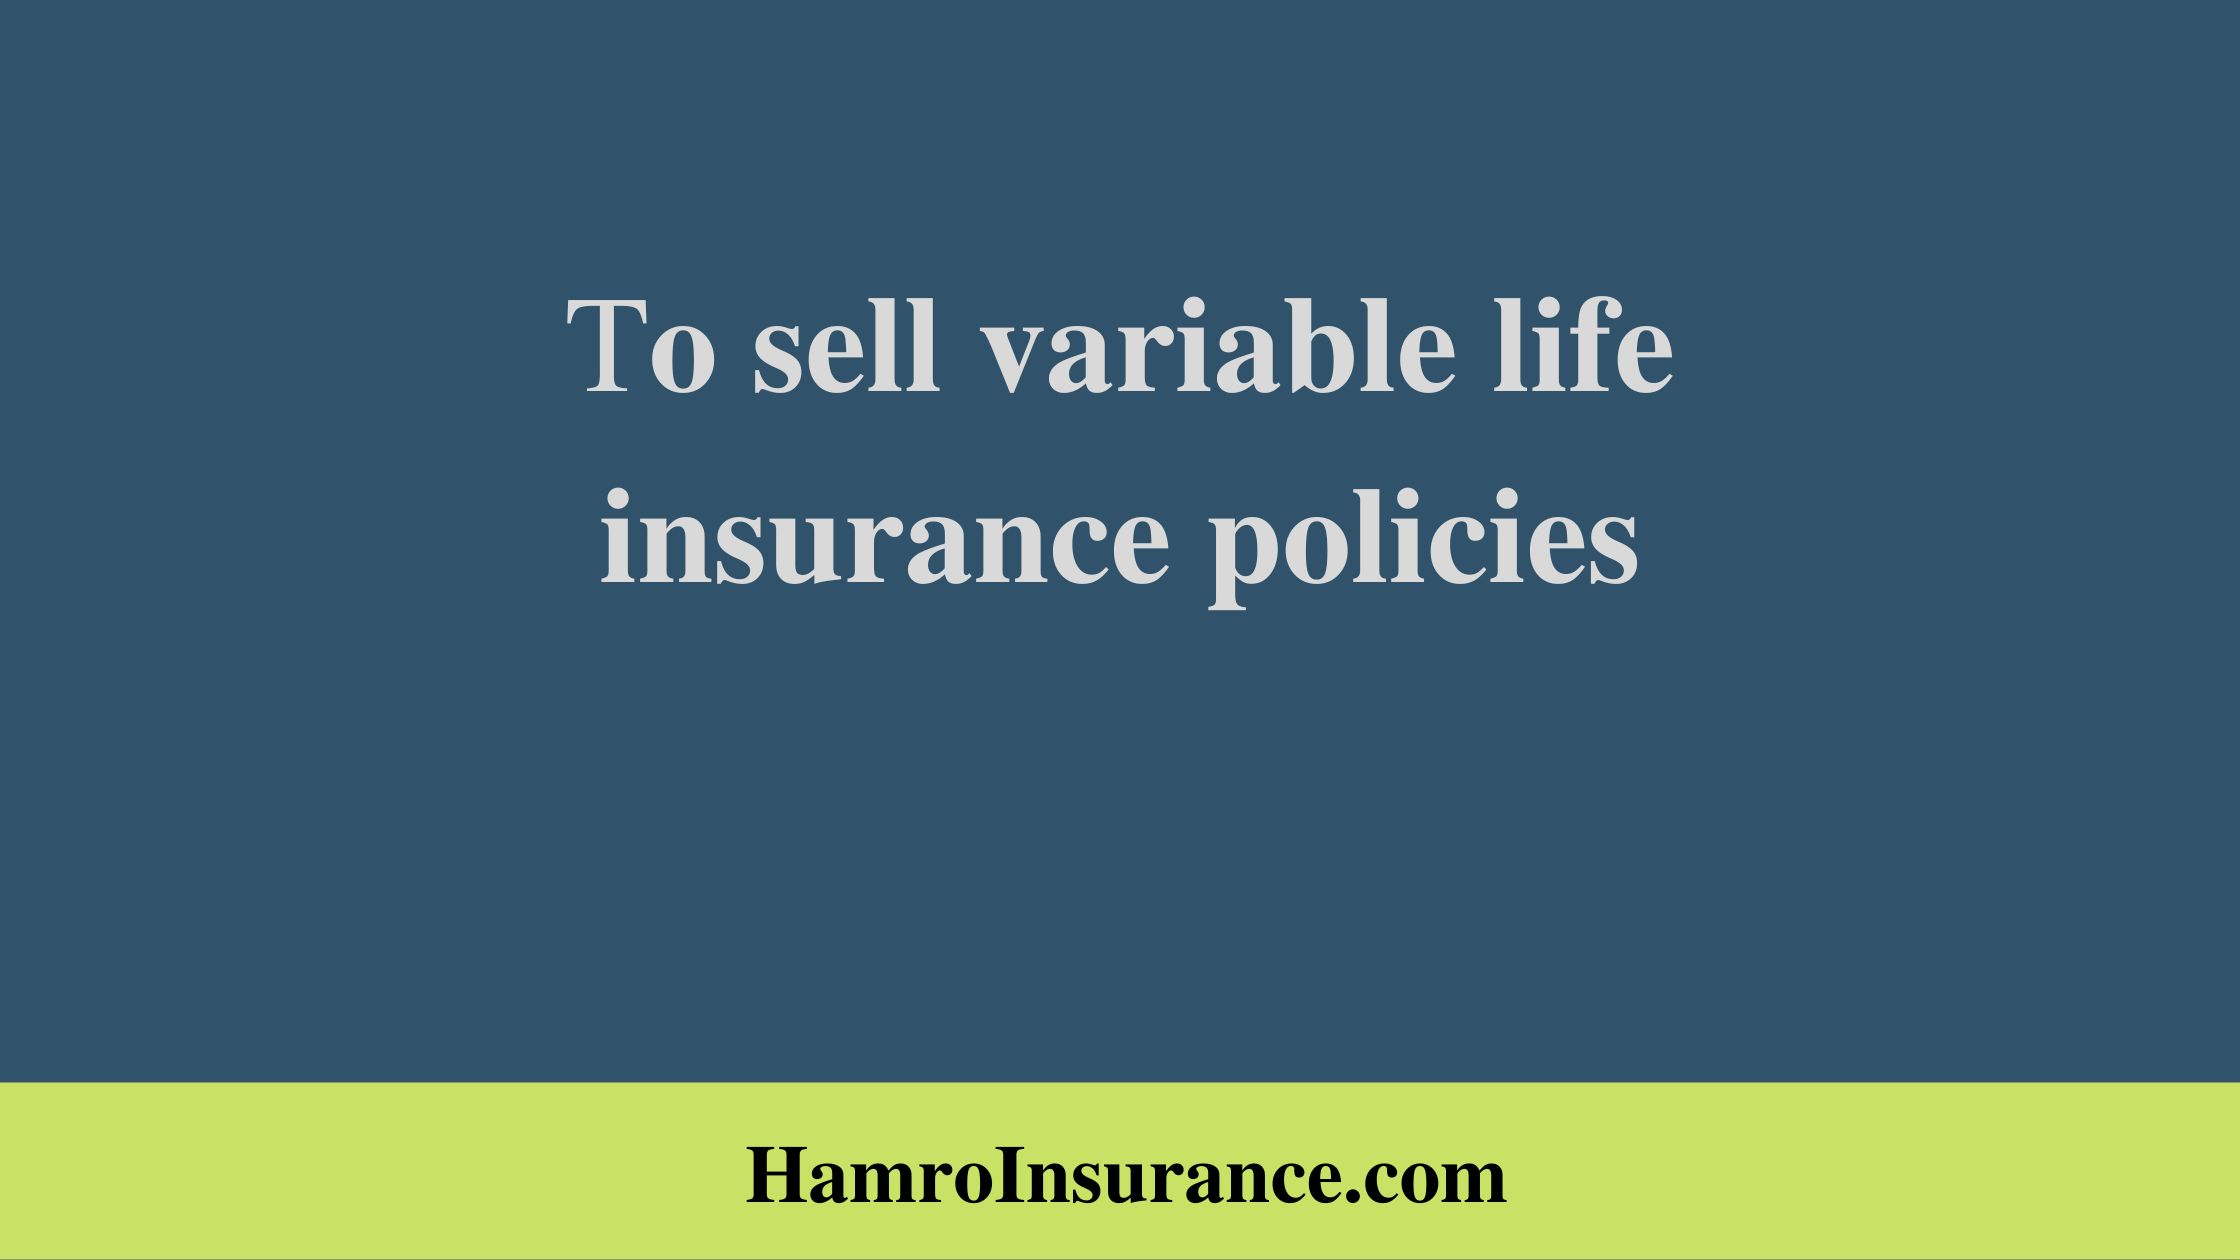 To sell variable life insurance policies